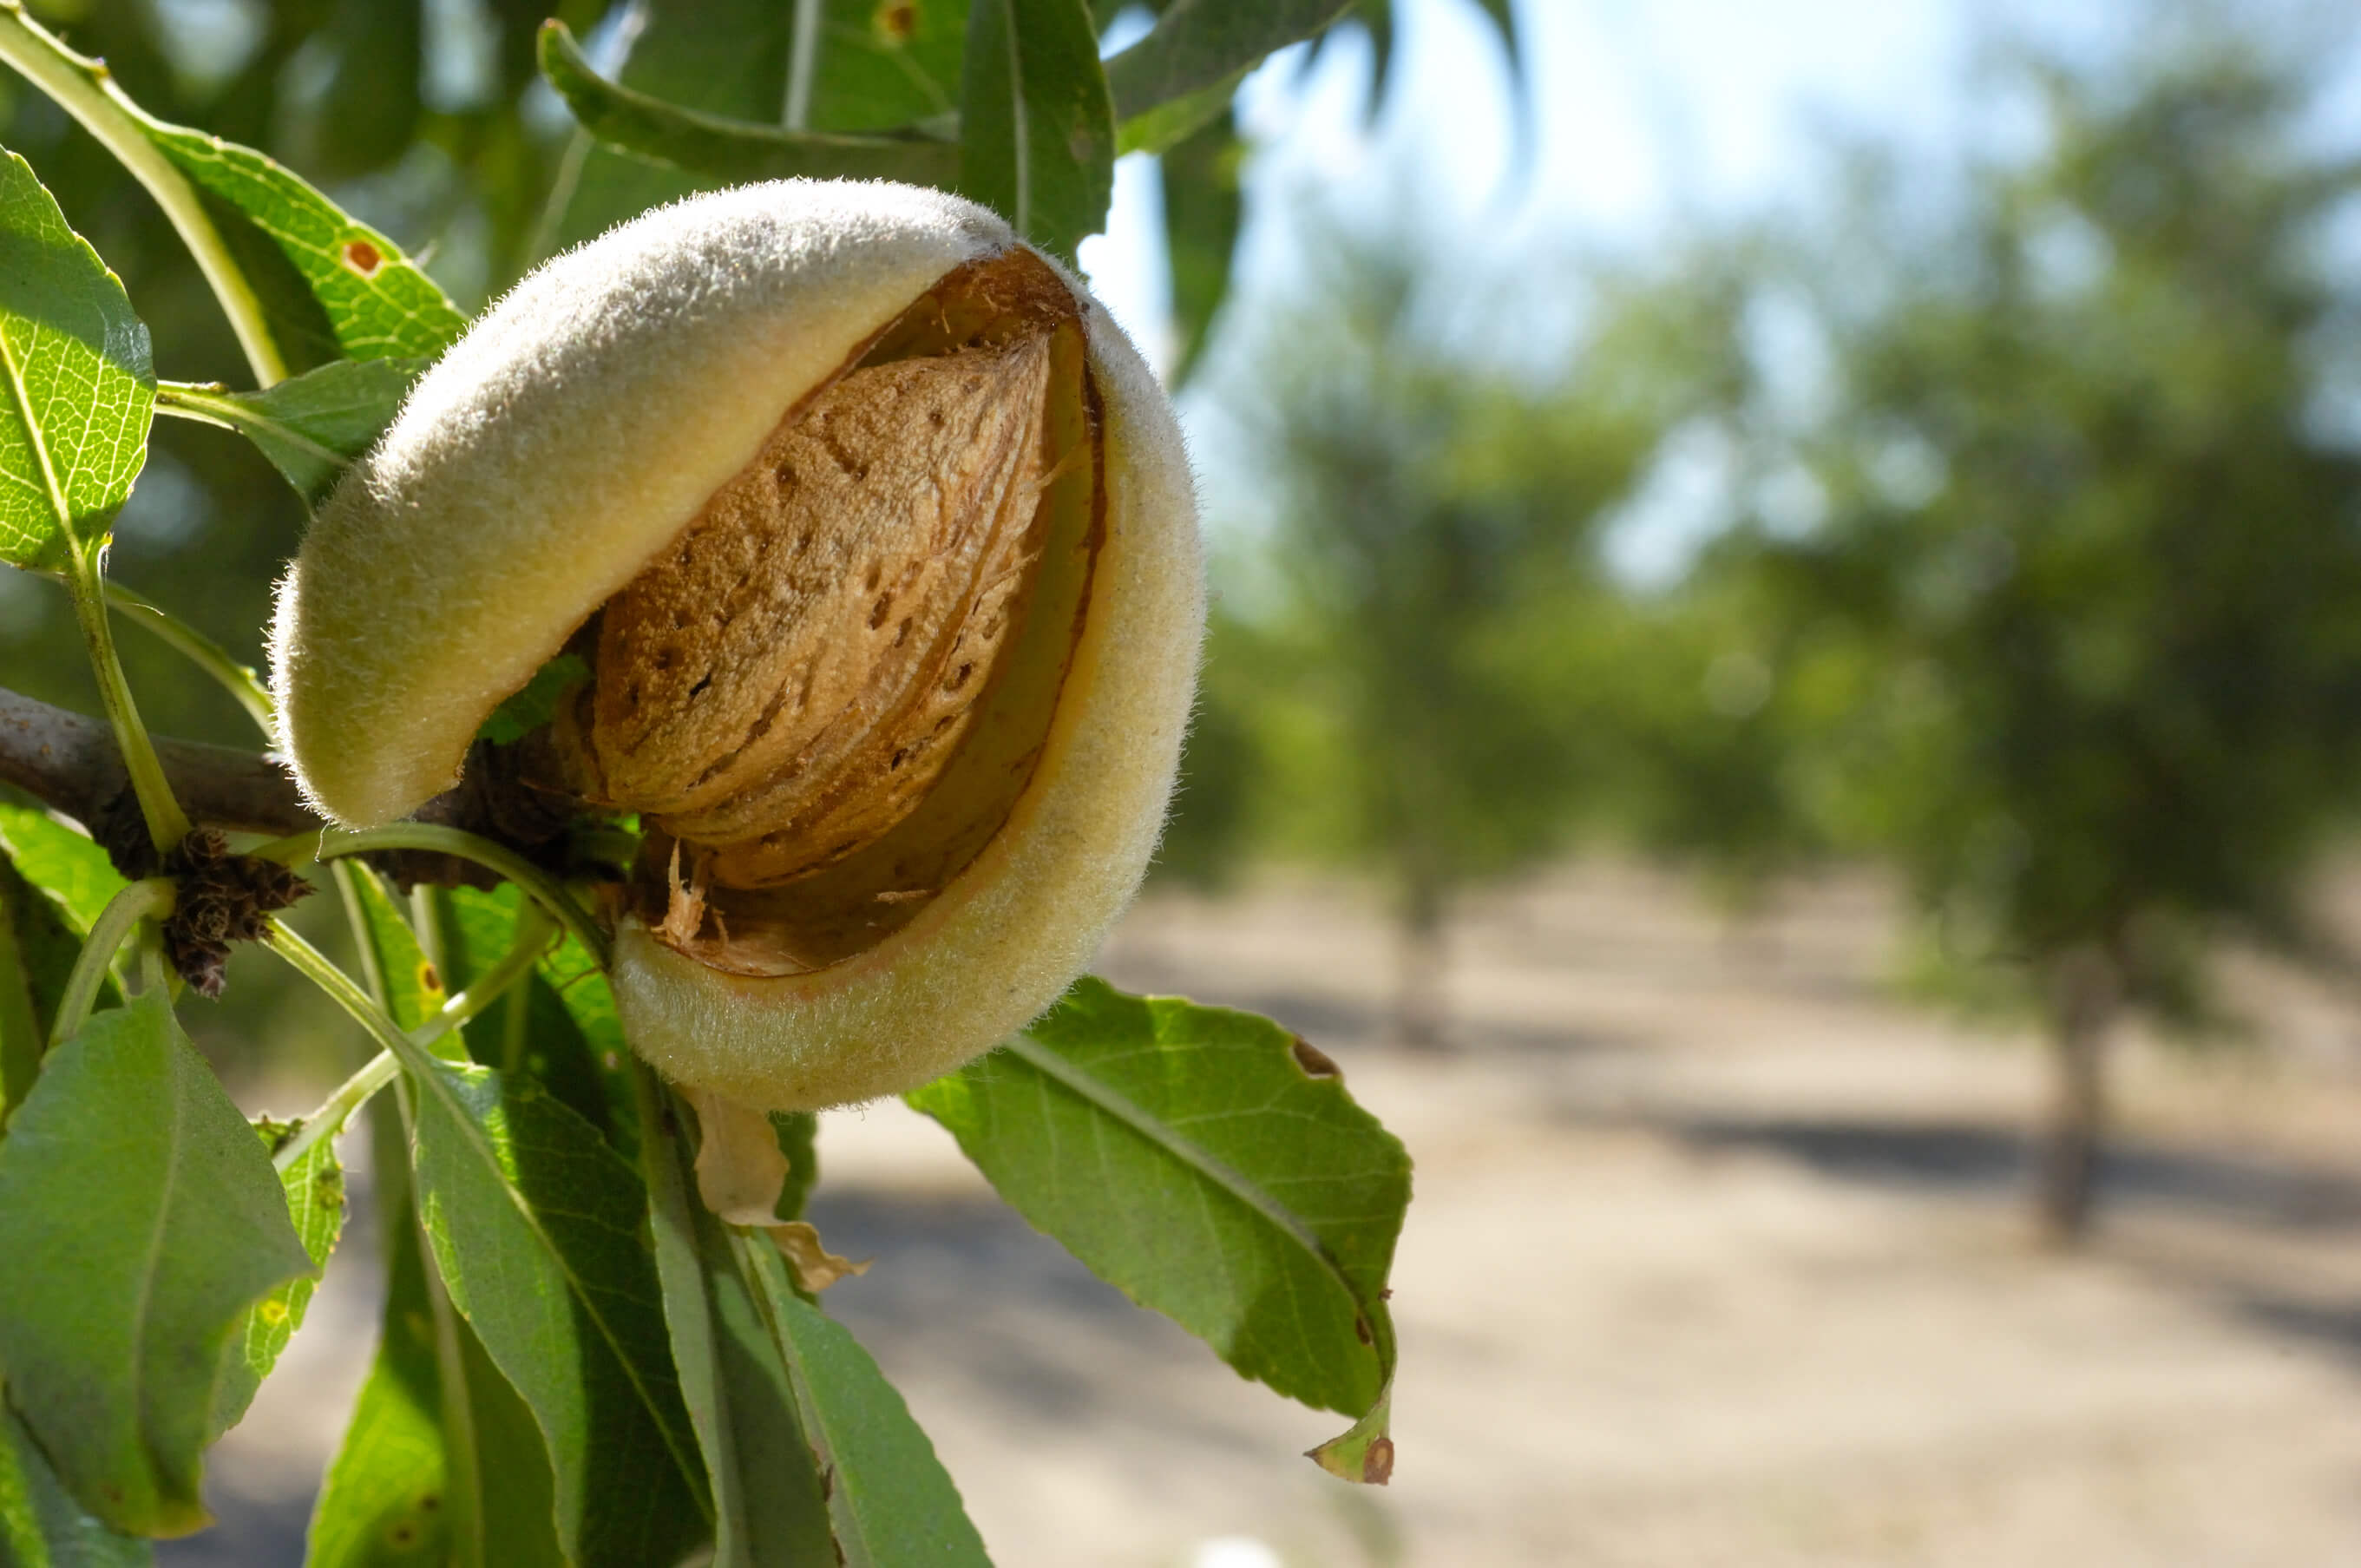 Close-up of Ripening Almonds on Central California Orchard